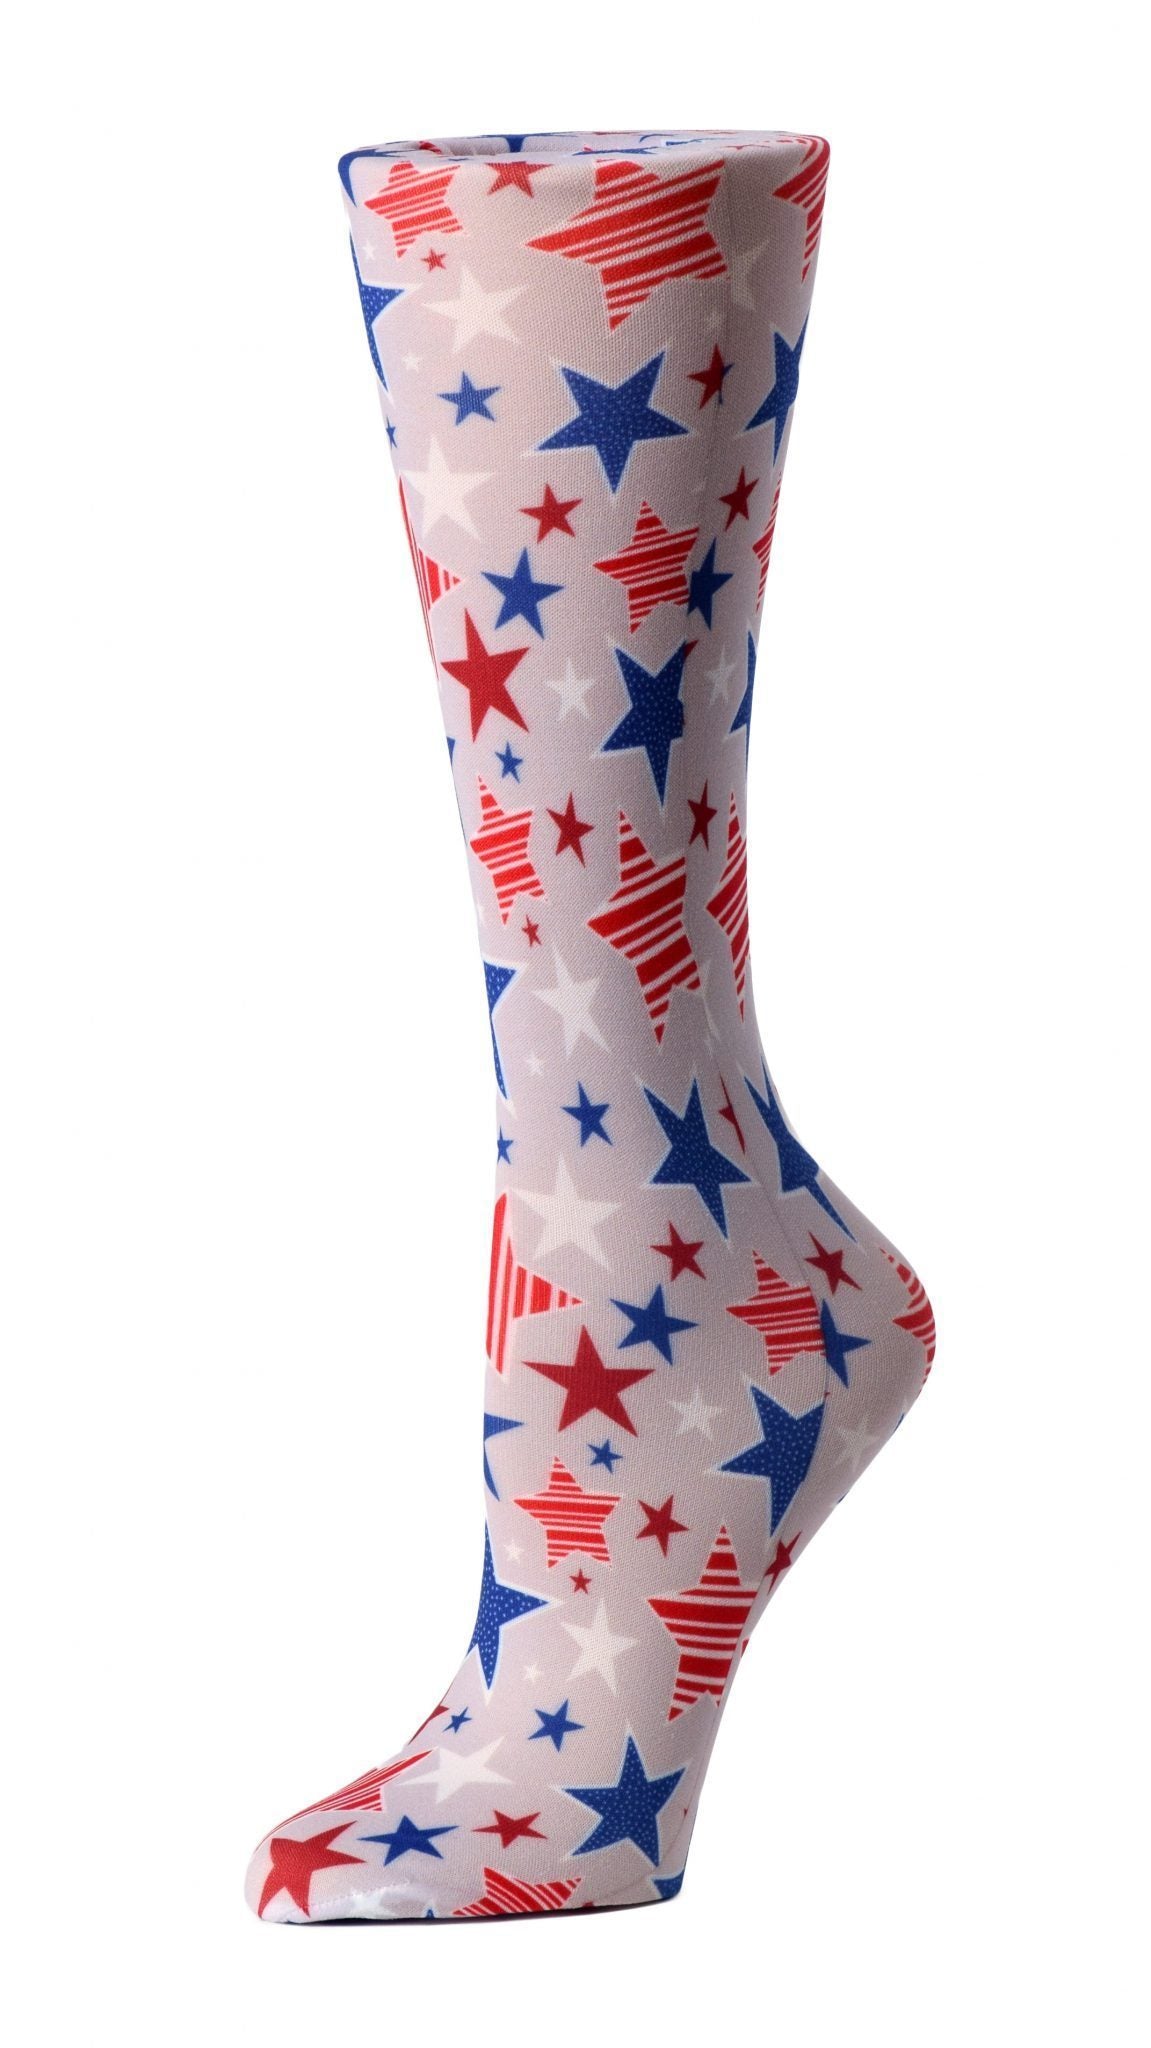 Cutieful Moderate Compression Socks 10-18 MMhg Wide Calf Knit Print Pattern American Stars at Parker's Clothing and Shoes.